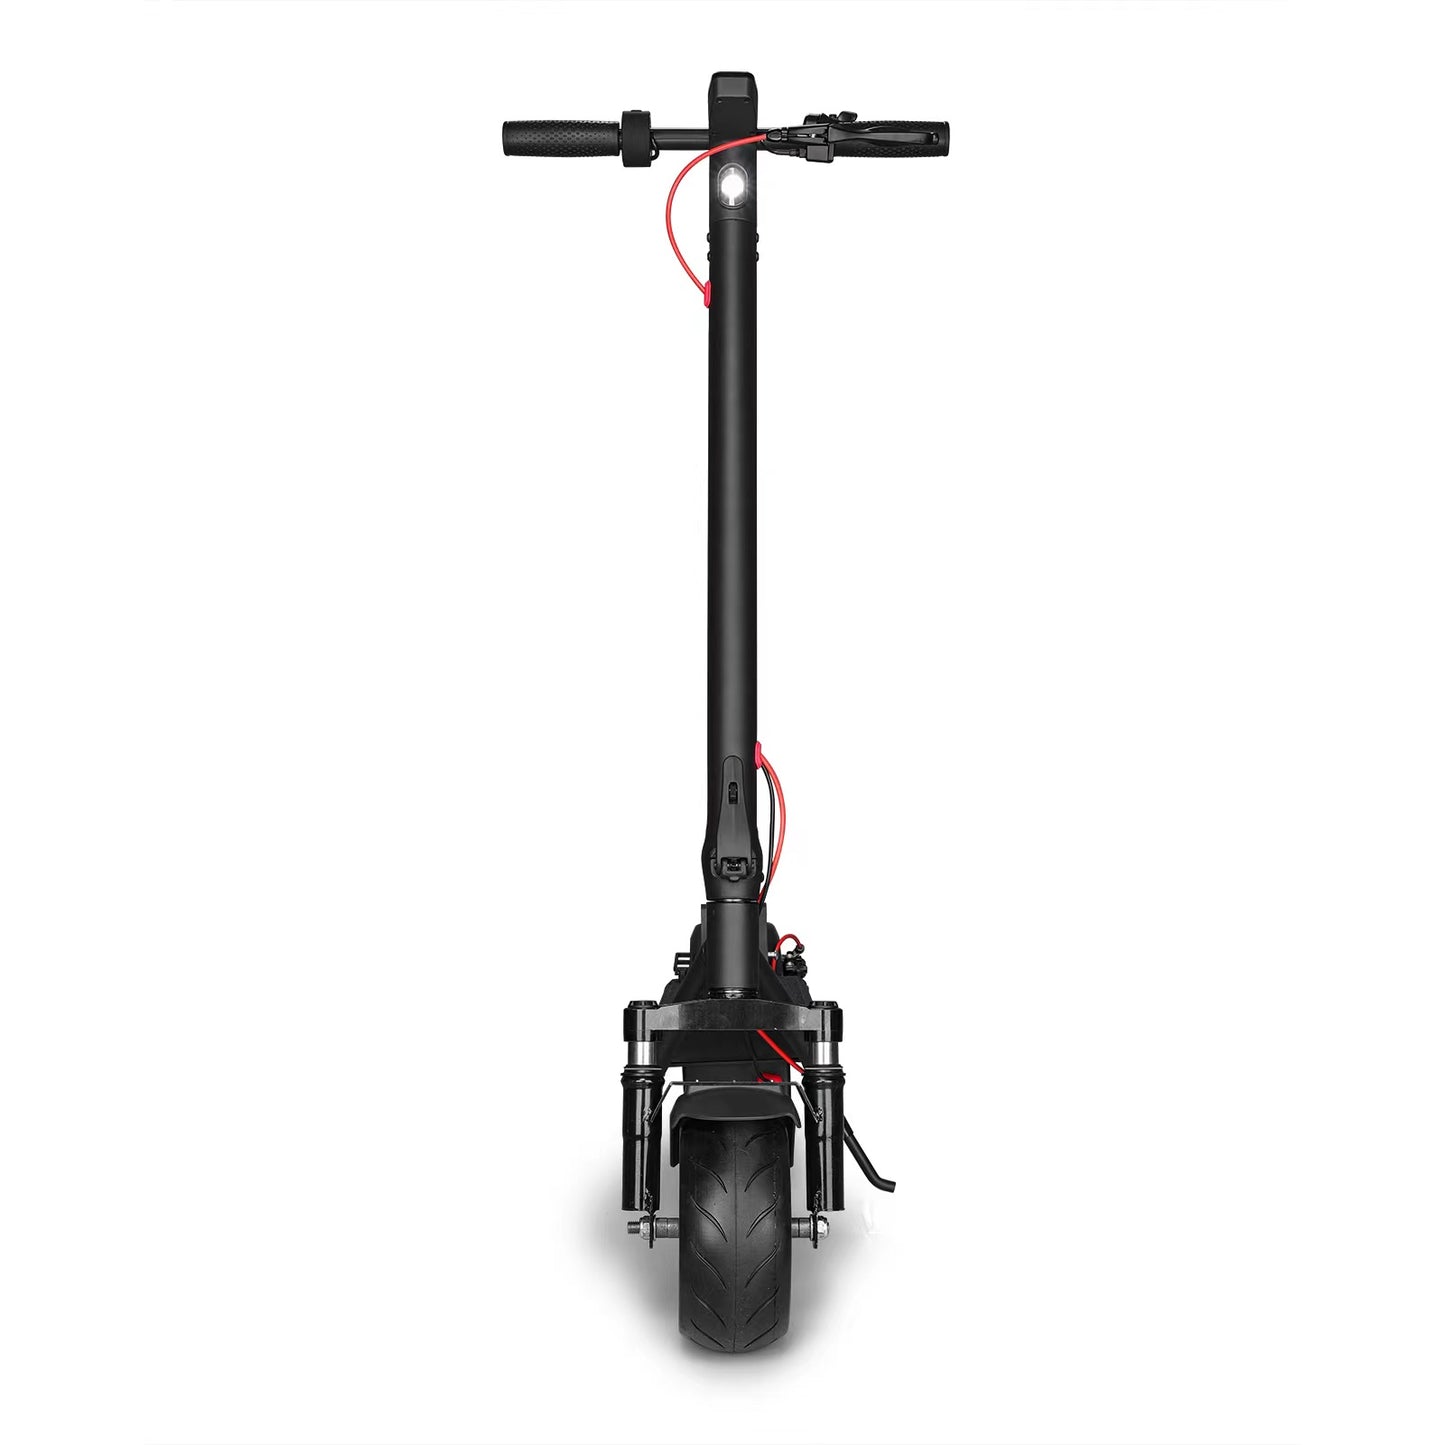 500W High Performance 10cm Fat Tires 9 Inch Electric Scooter